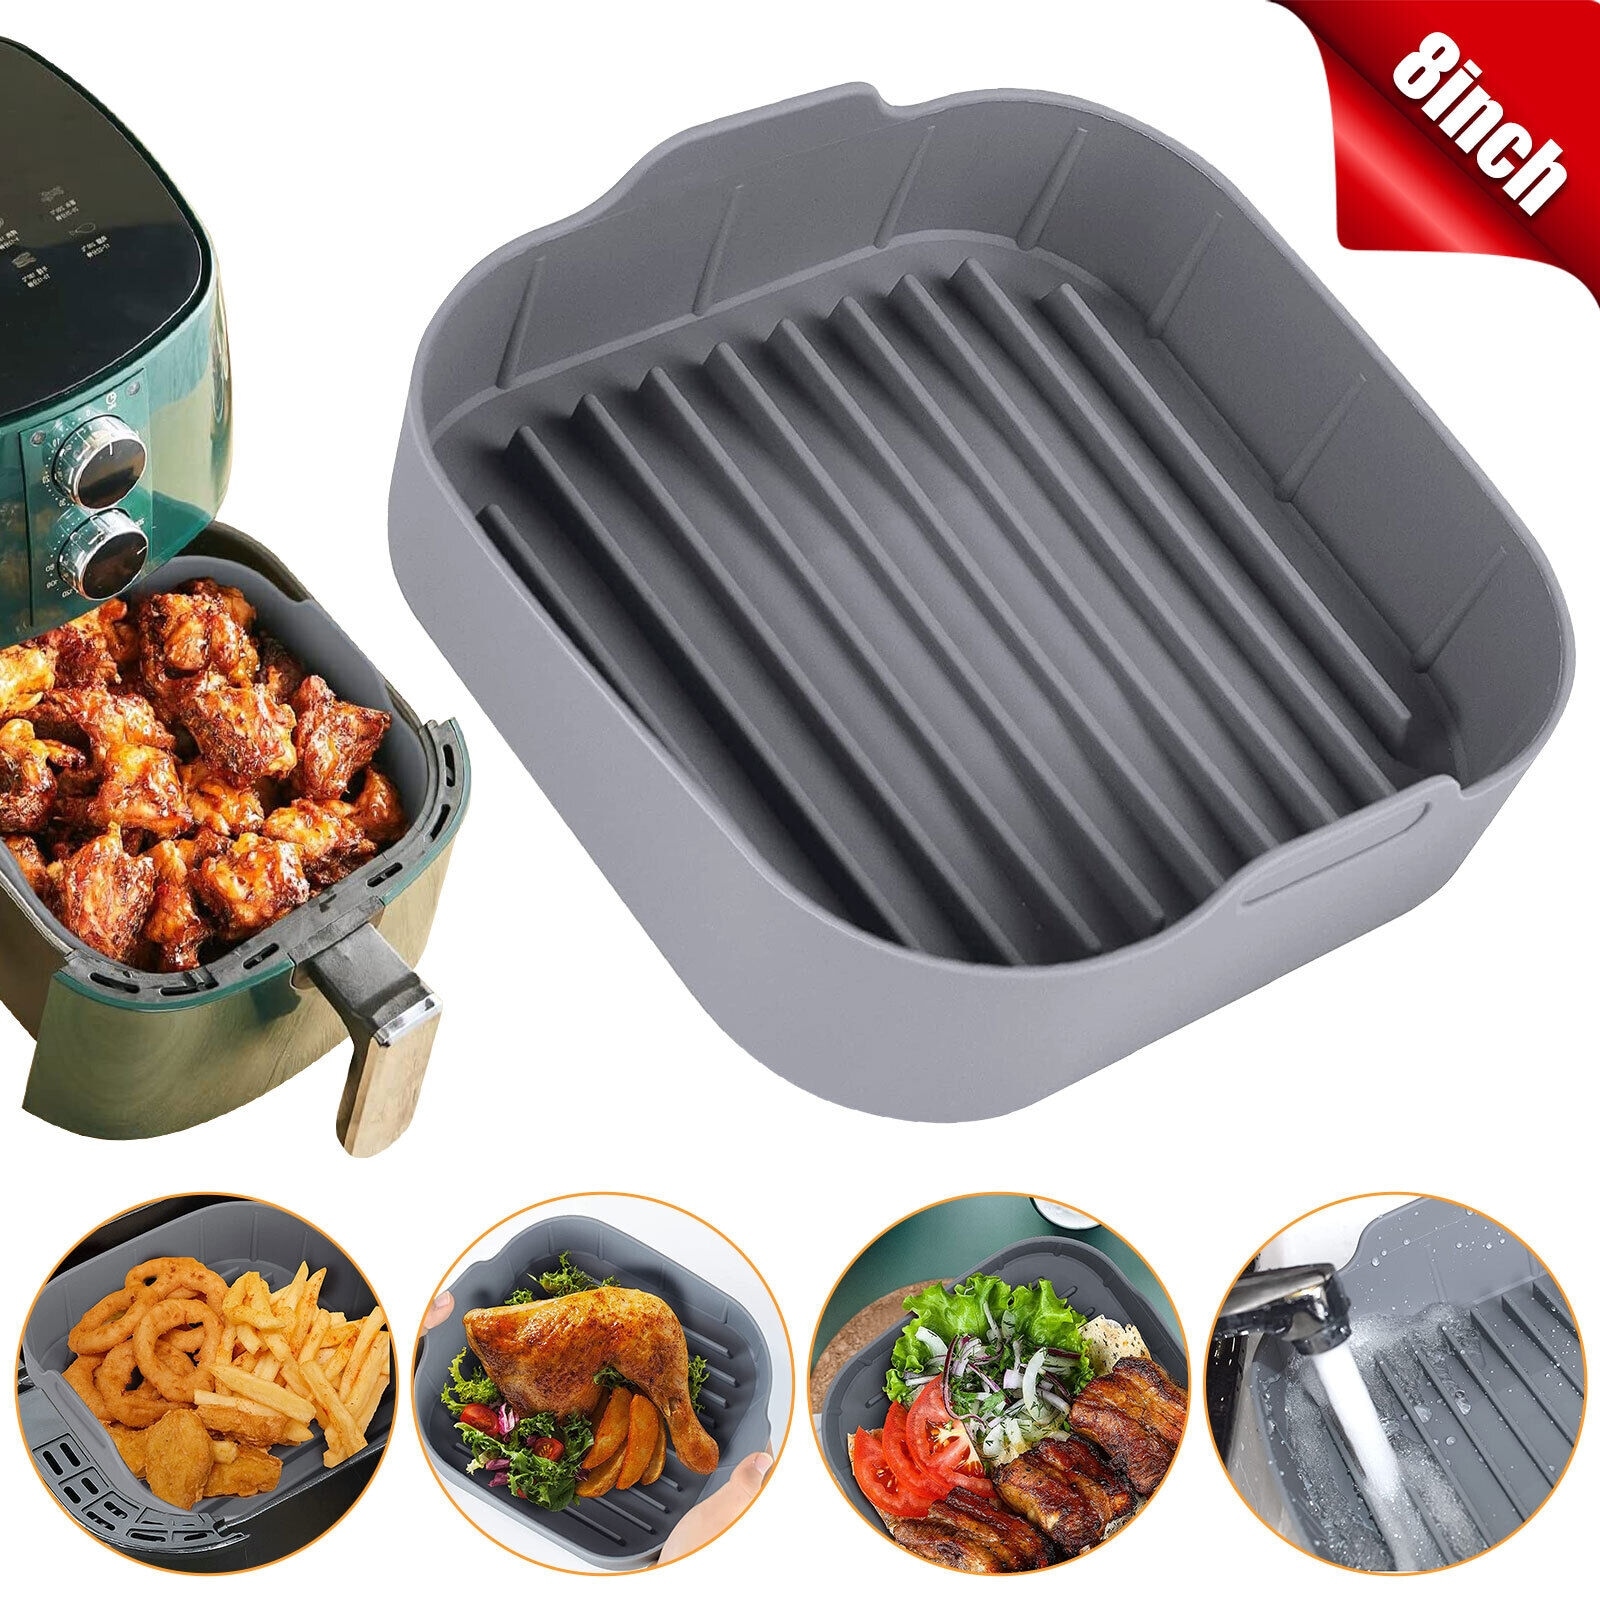 https://ak1.ostkcdn.com/images/products/is/images/direct/80b00b2fdec408b5218ca94d152366606471fdc5/Non-Stick-Silicone-Liners-for-Air-Fryer-Basket-and-Oven-Tray---Oil-Proof.jpg